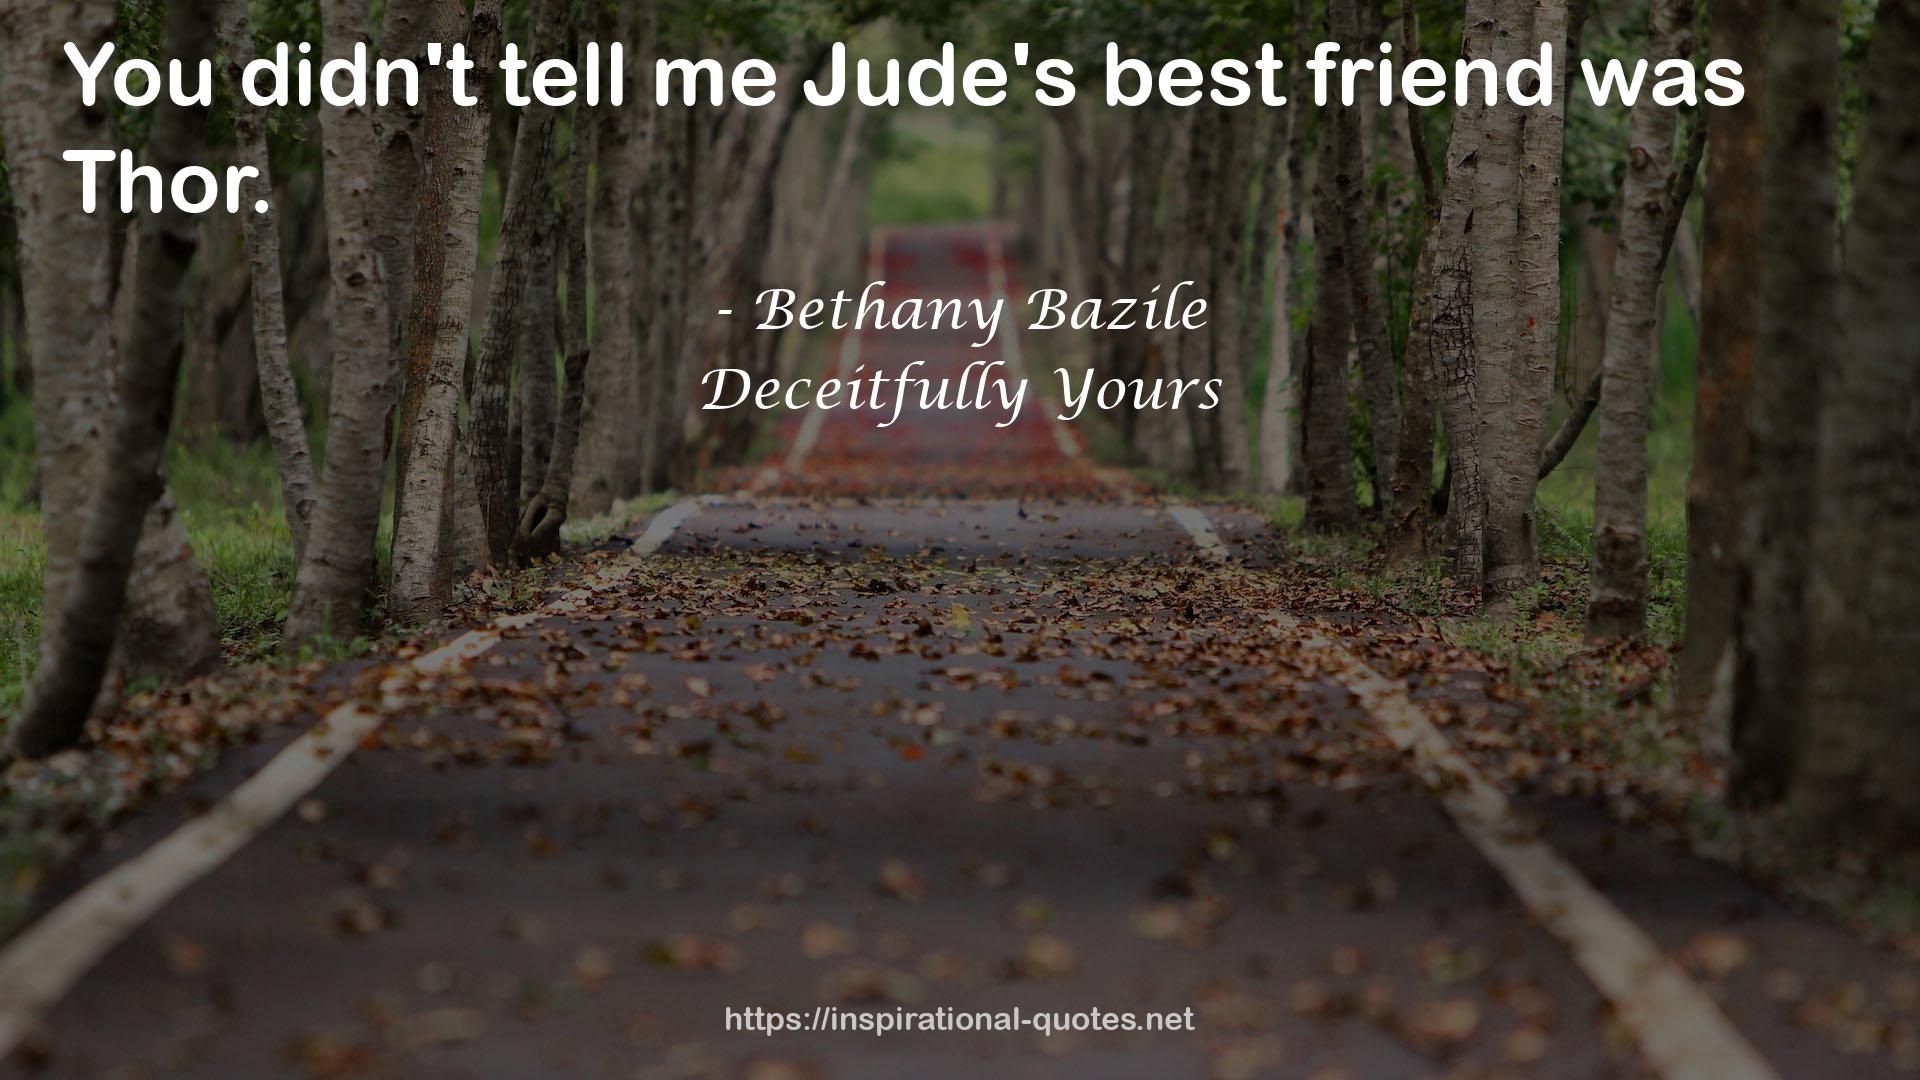 Deceitfully Yours QUOTES